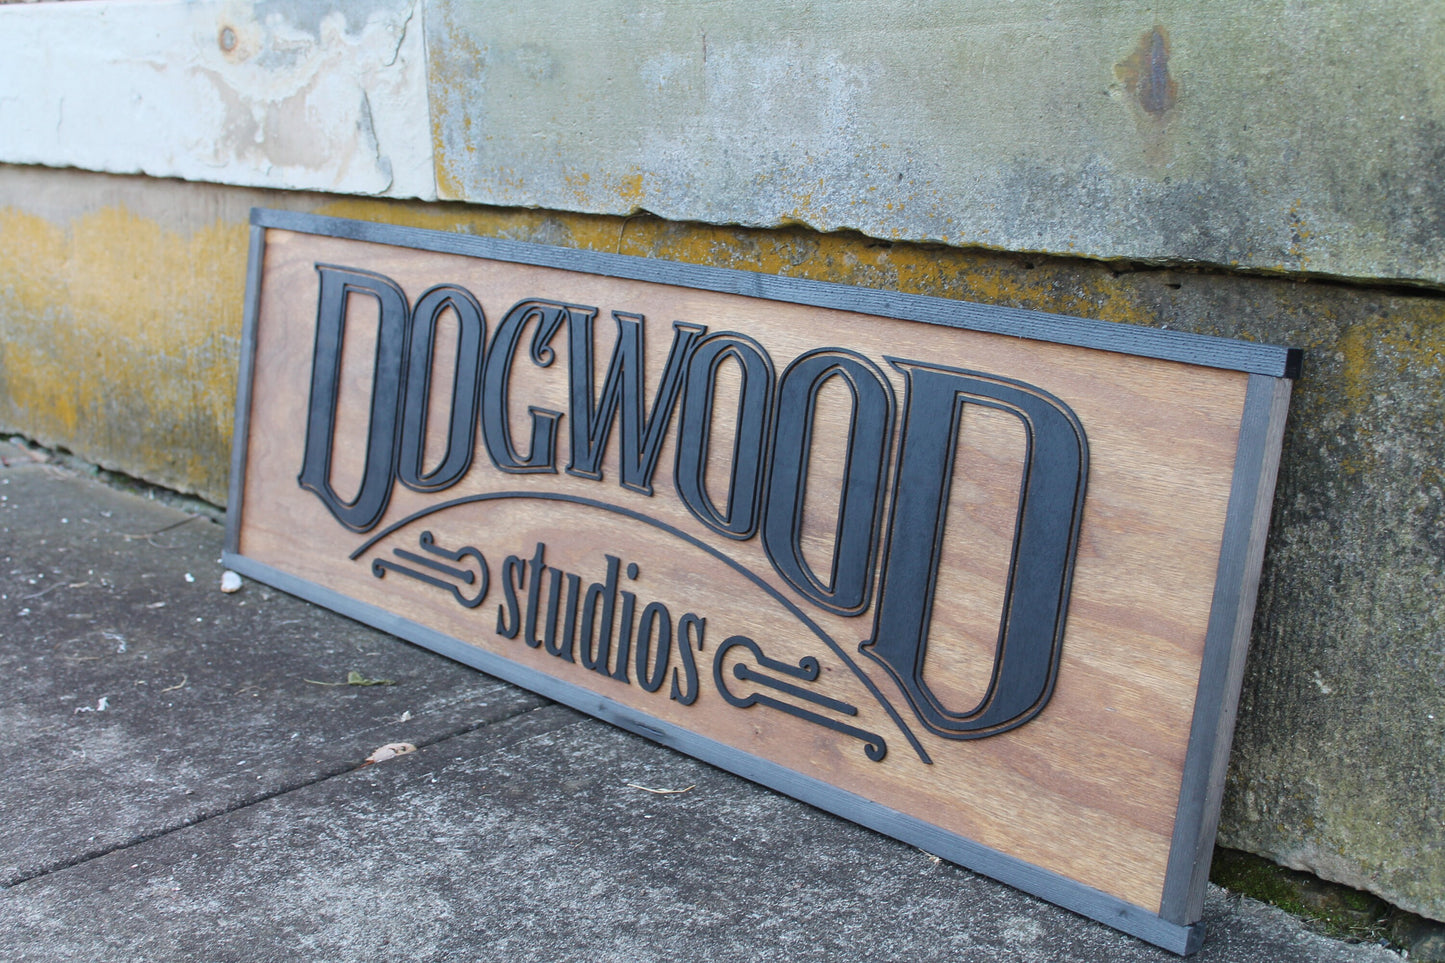 Large Custom Ranch Sign Dogwood Over-sized Rustic Business Logo Wood Laser Cut Out 3D Extra Large Sign Studio Sign Commerical signage